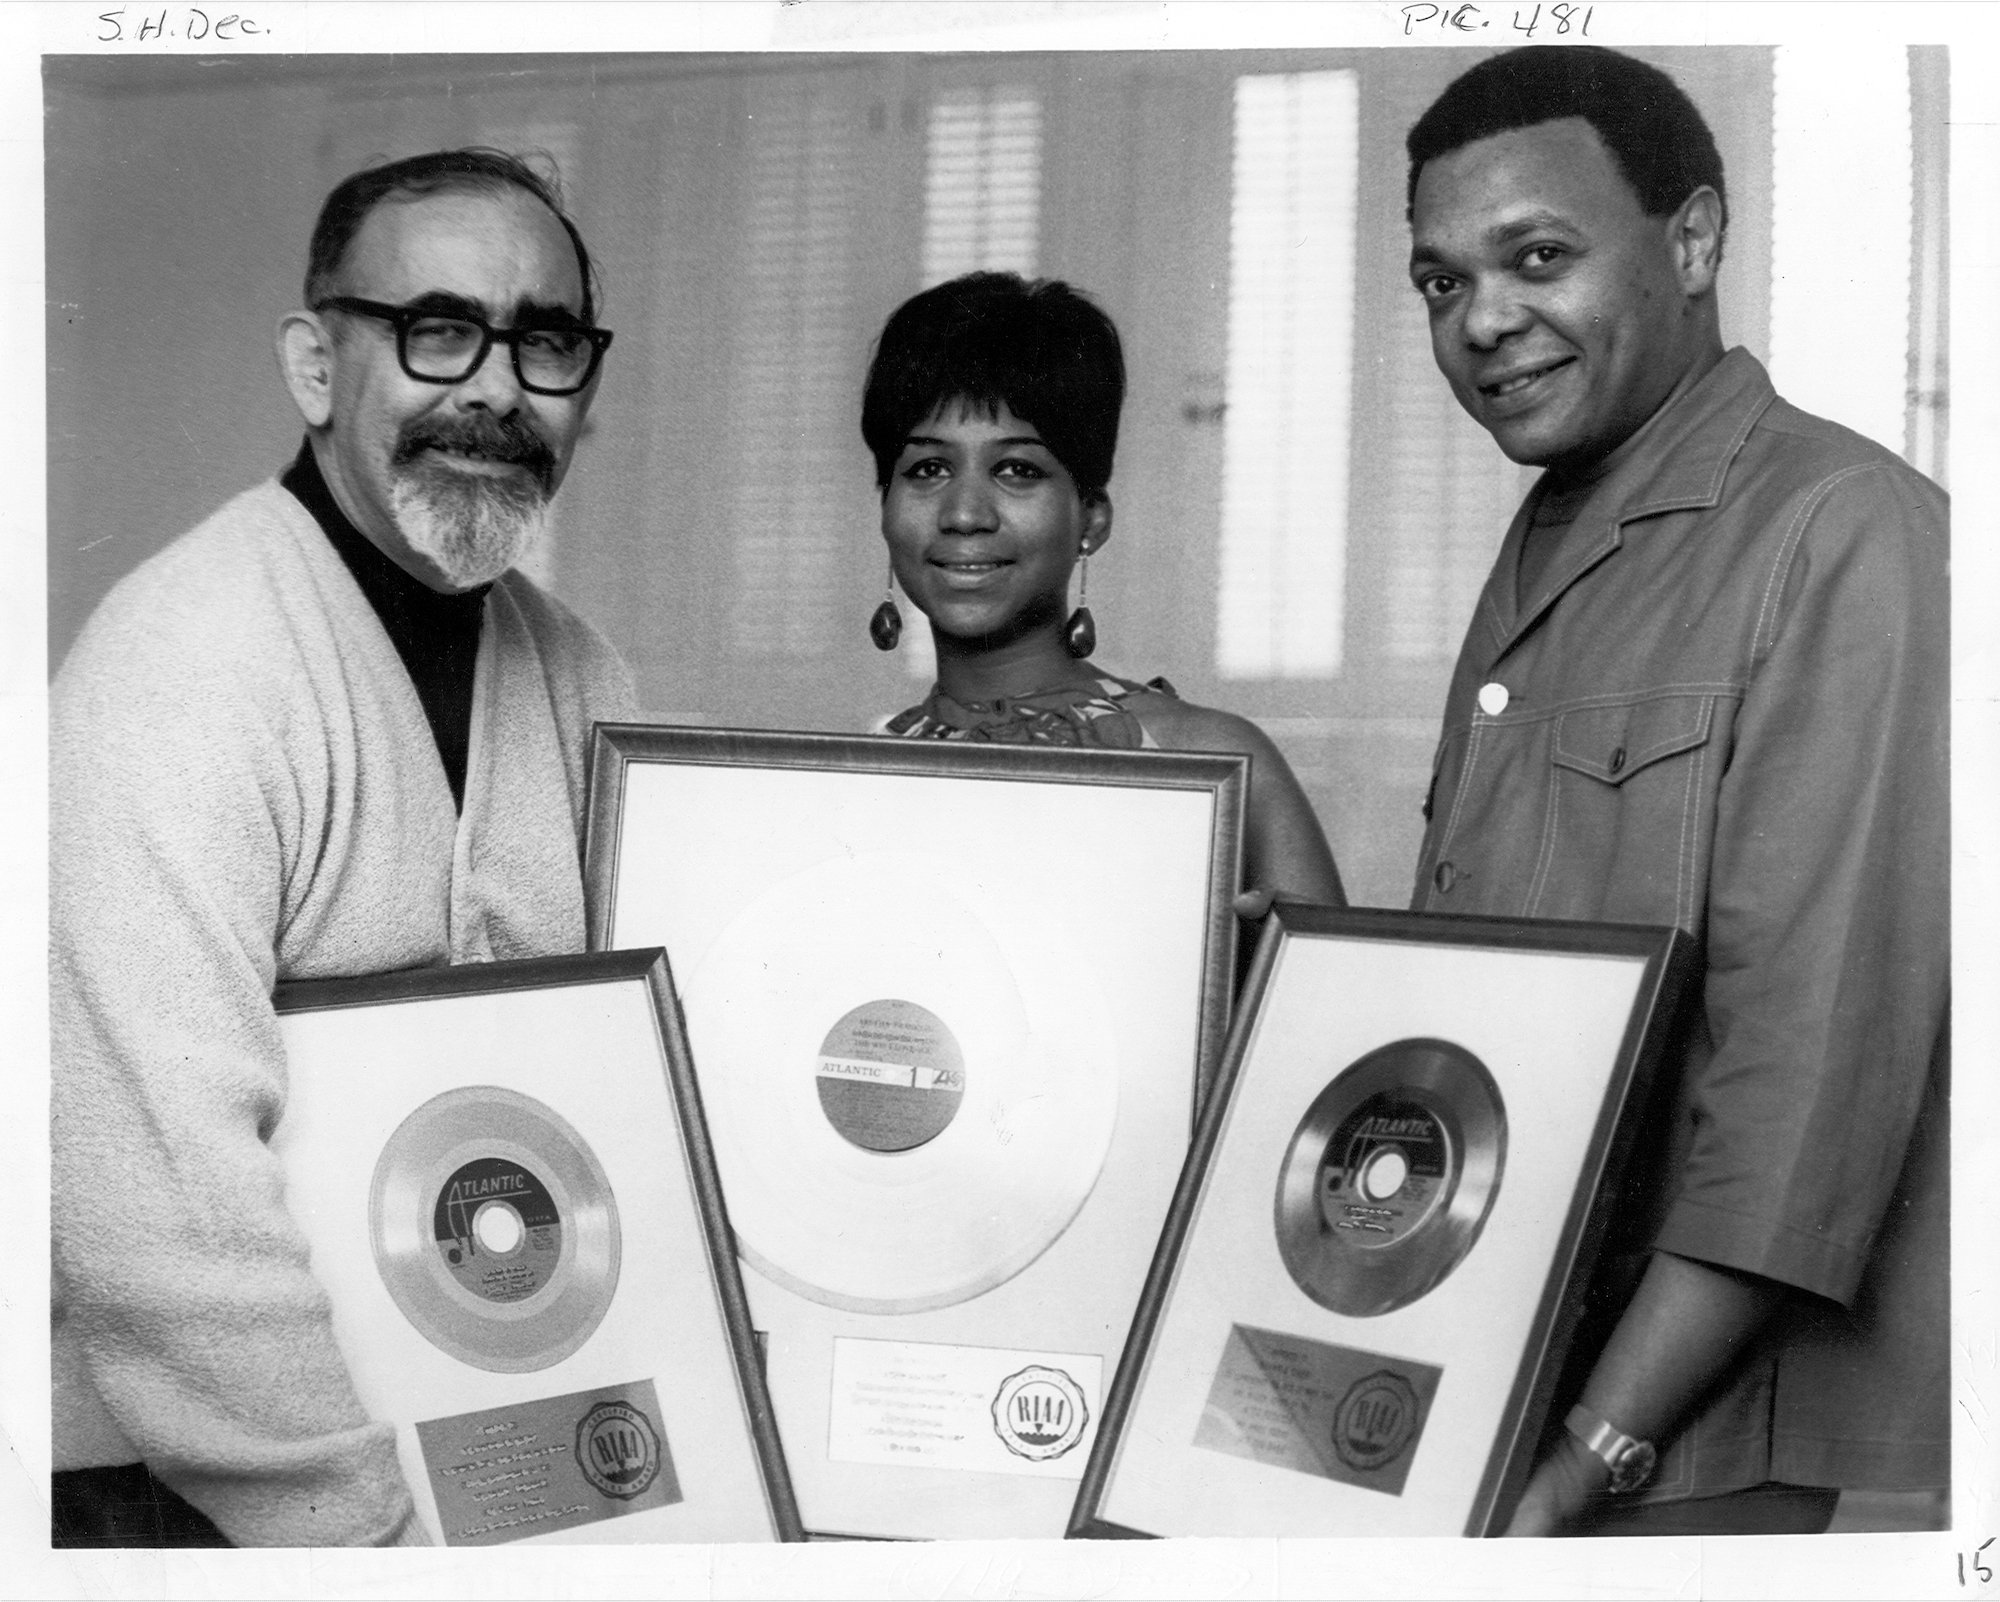 Aretha Franklin and Ted White holding framed records with producer Jerry Wexler in 1968